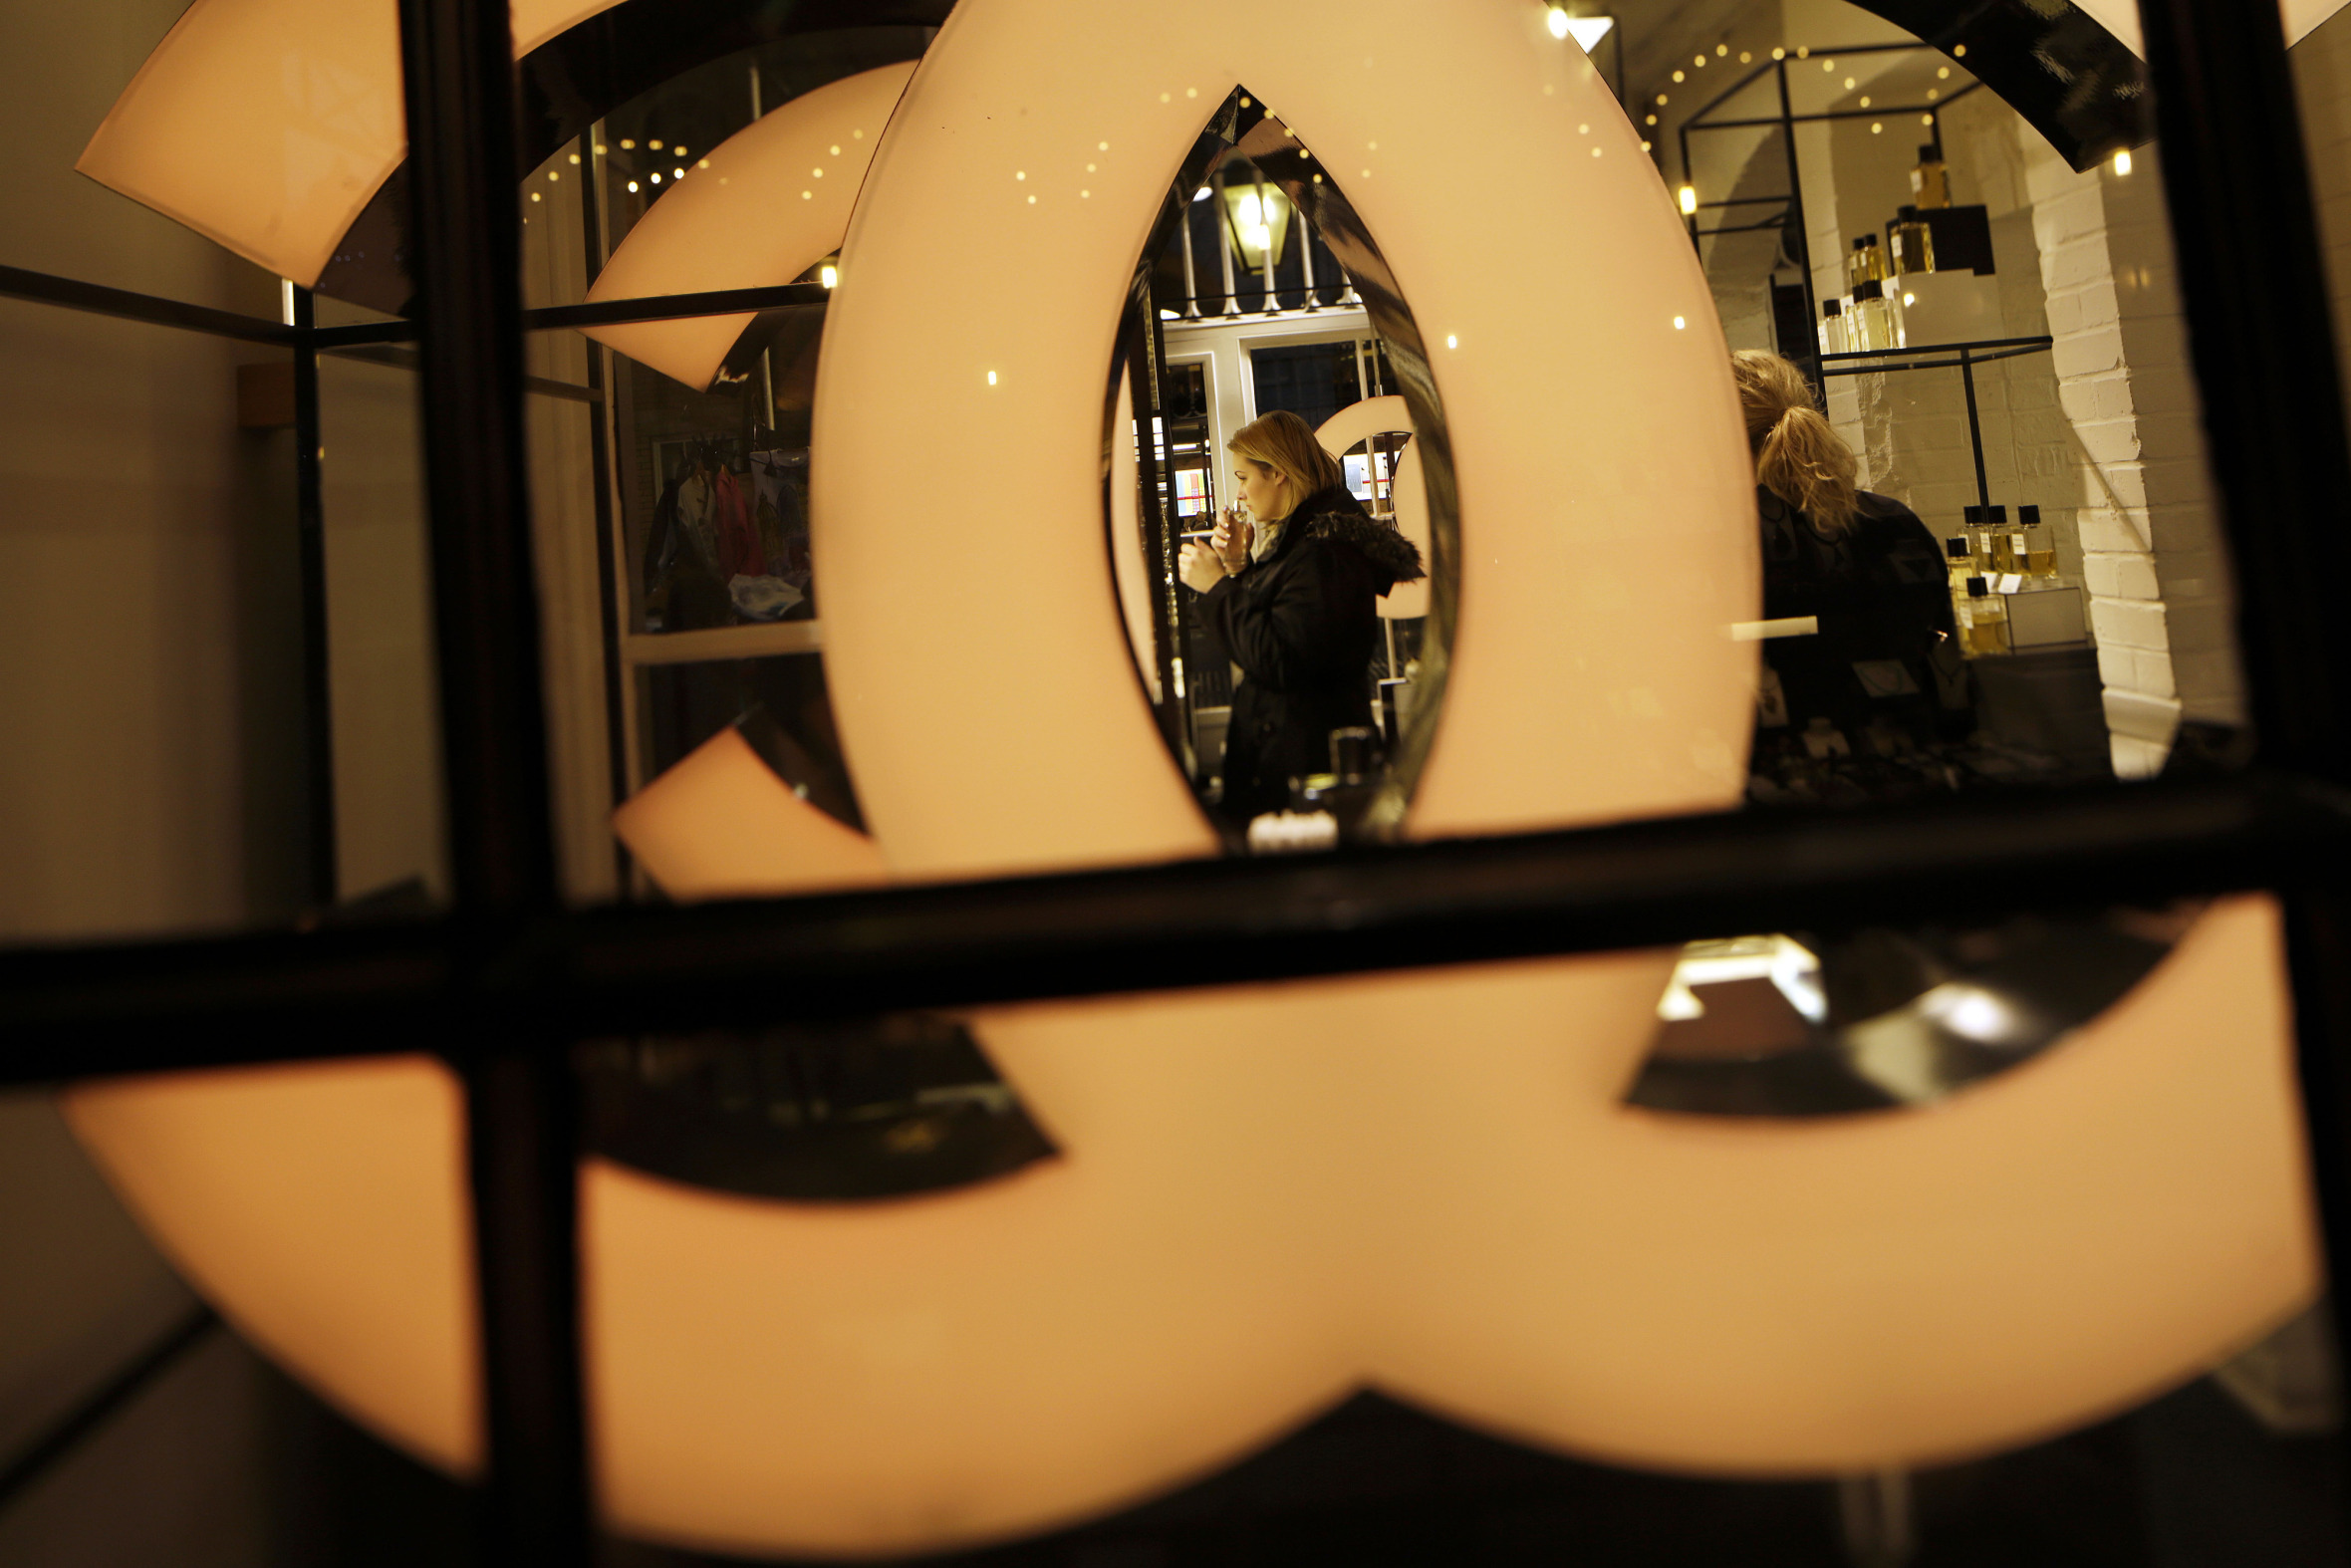 Chanel Raises China Prices in September as Luxury Demand Slows - Bloomberg